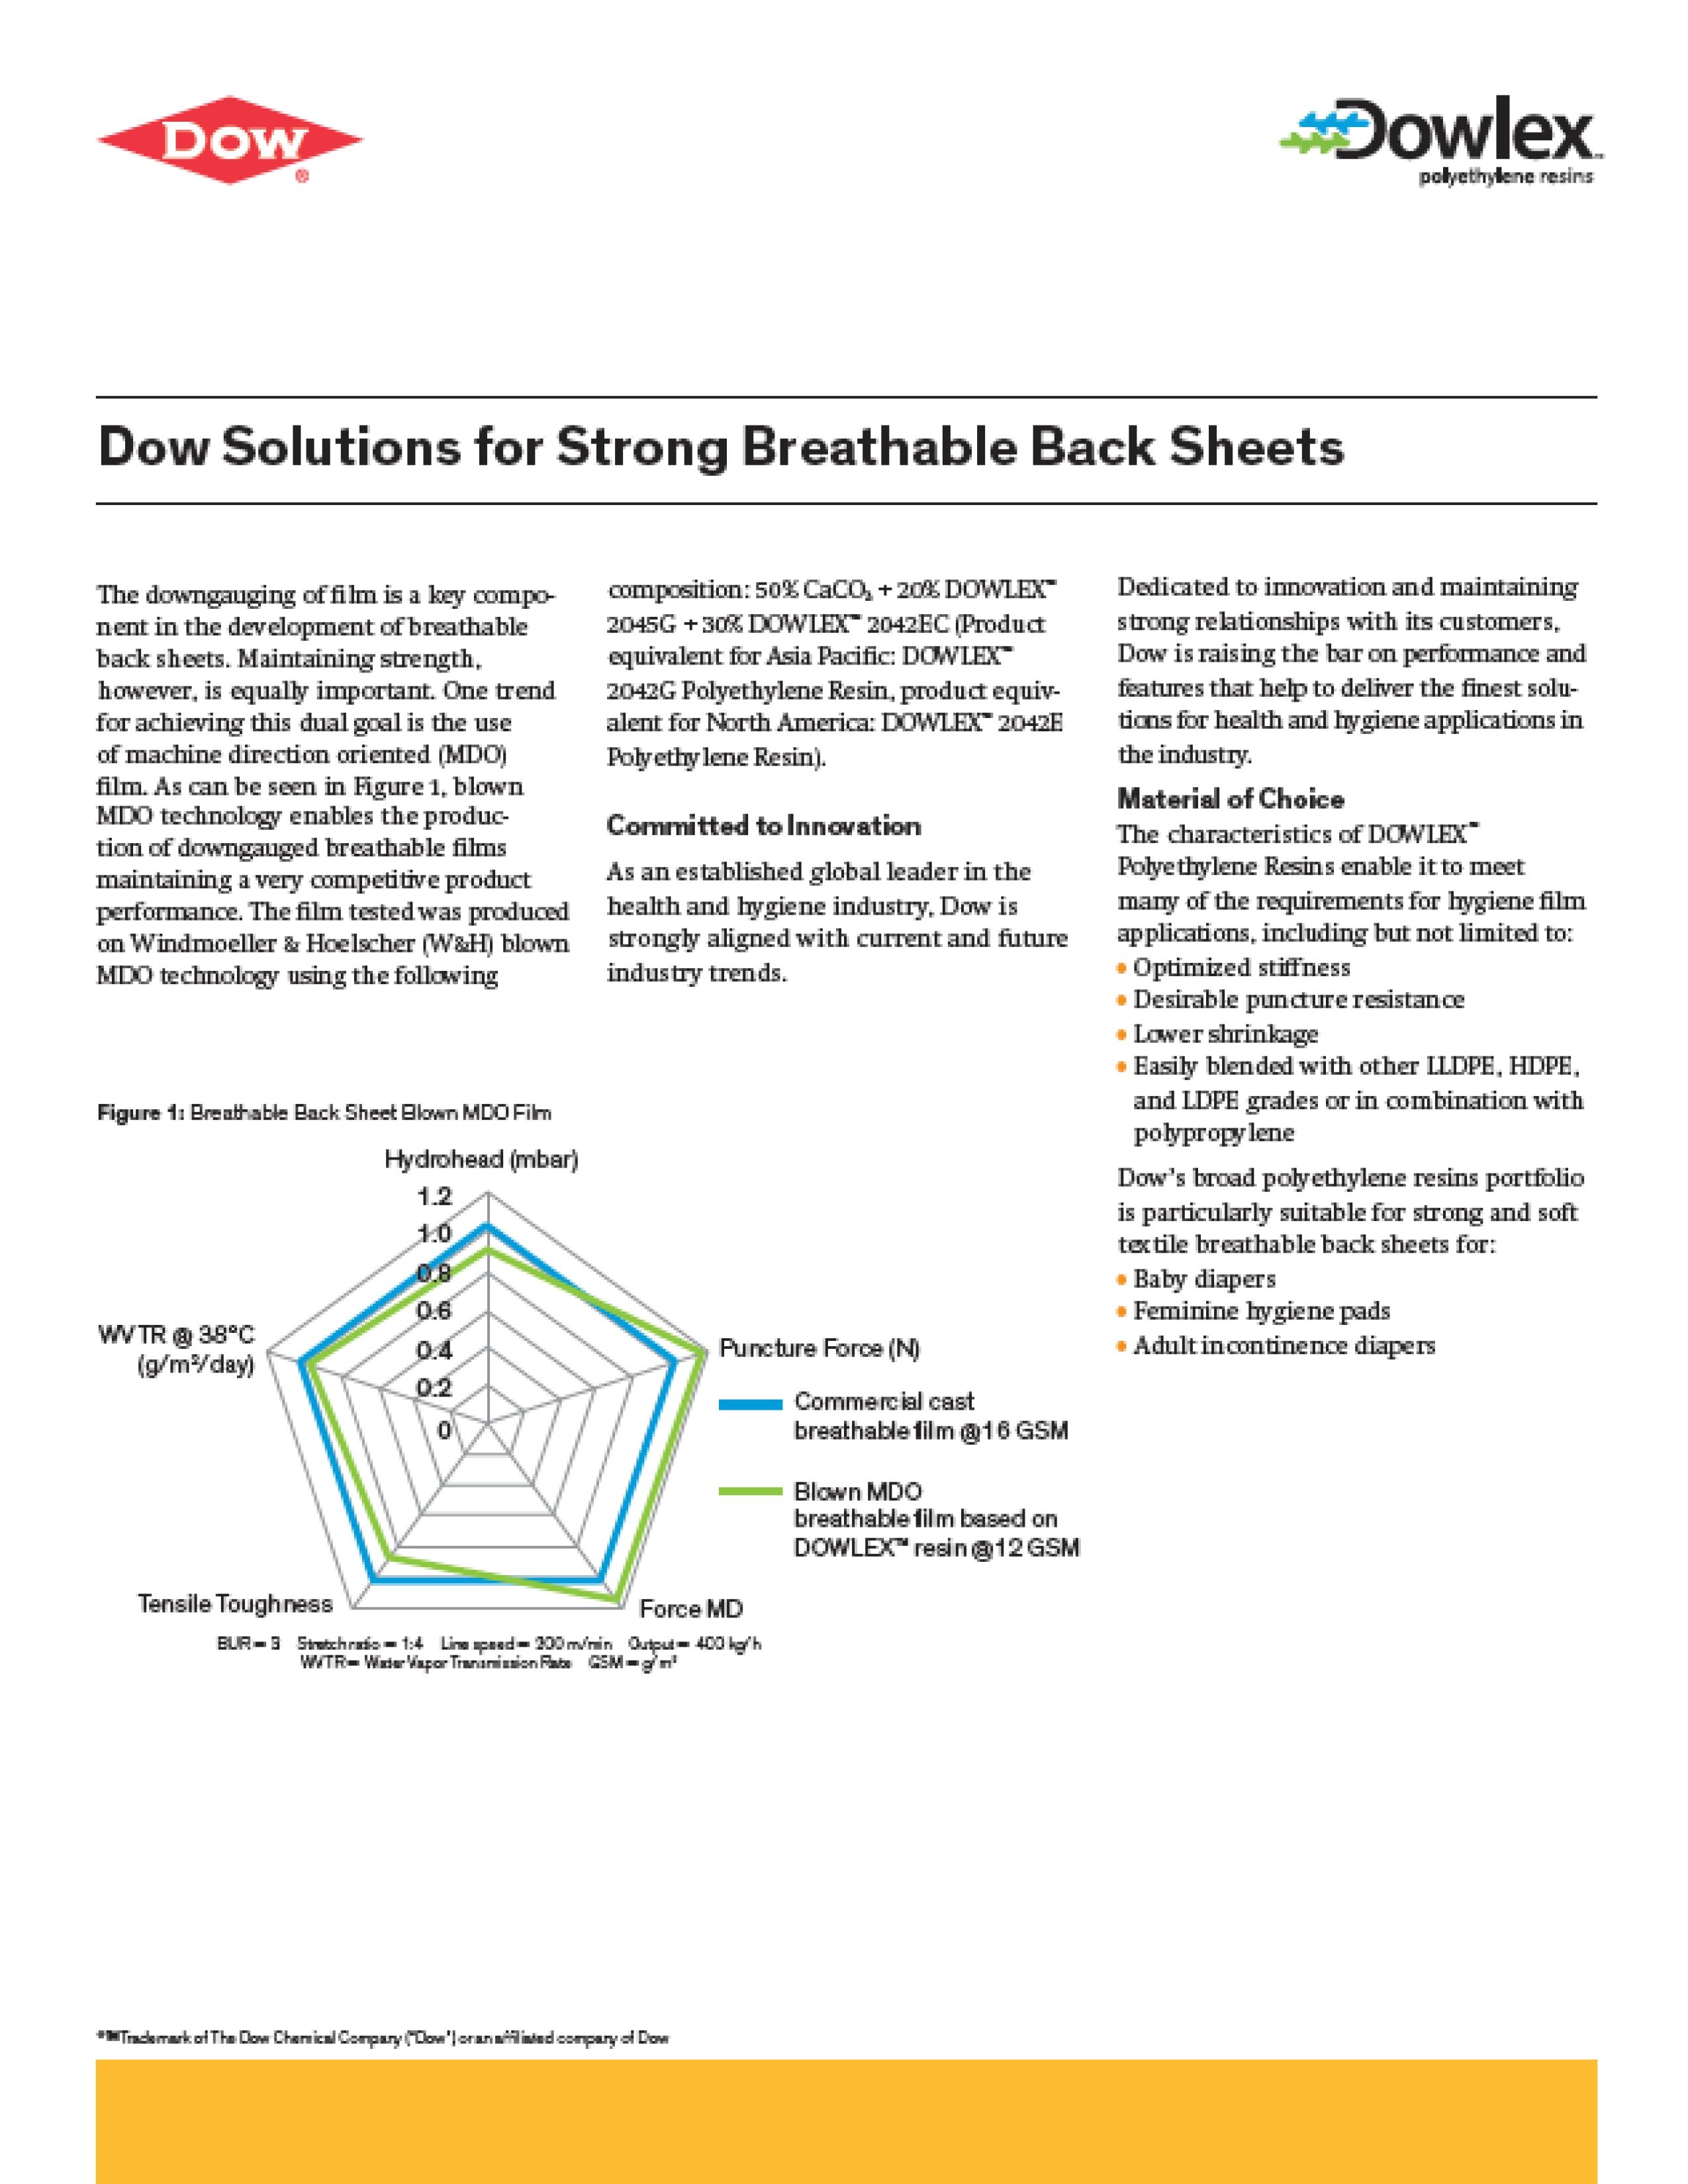 DOWLEX™ Dow Solutions for Strong Breathable Back Sheets